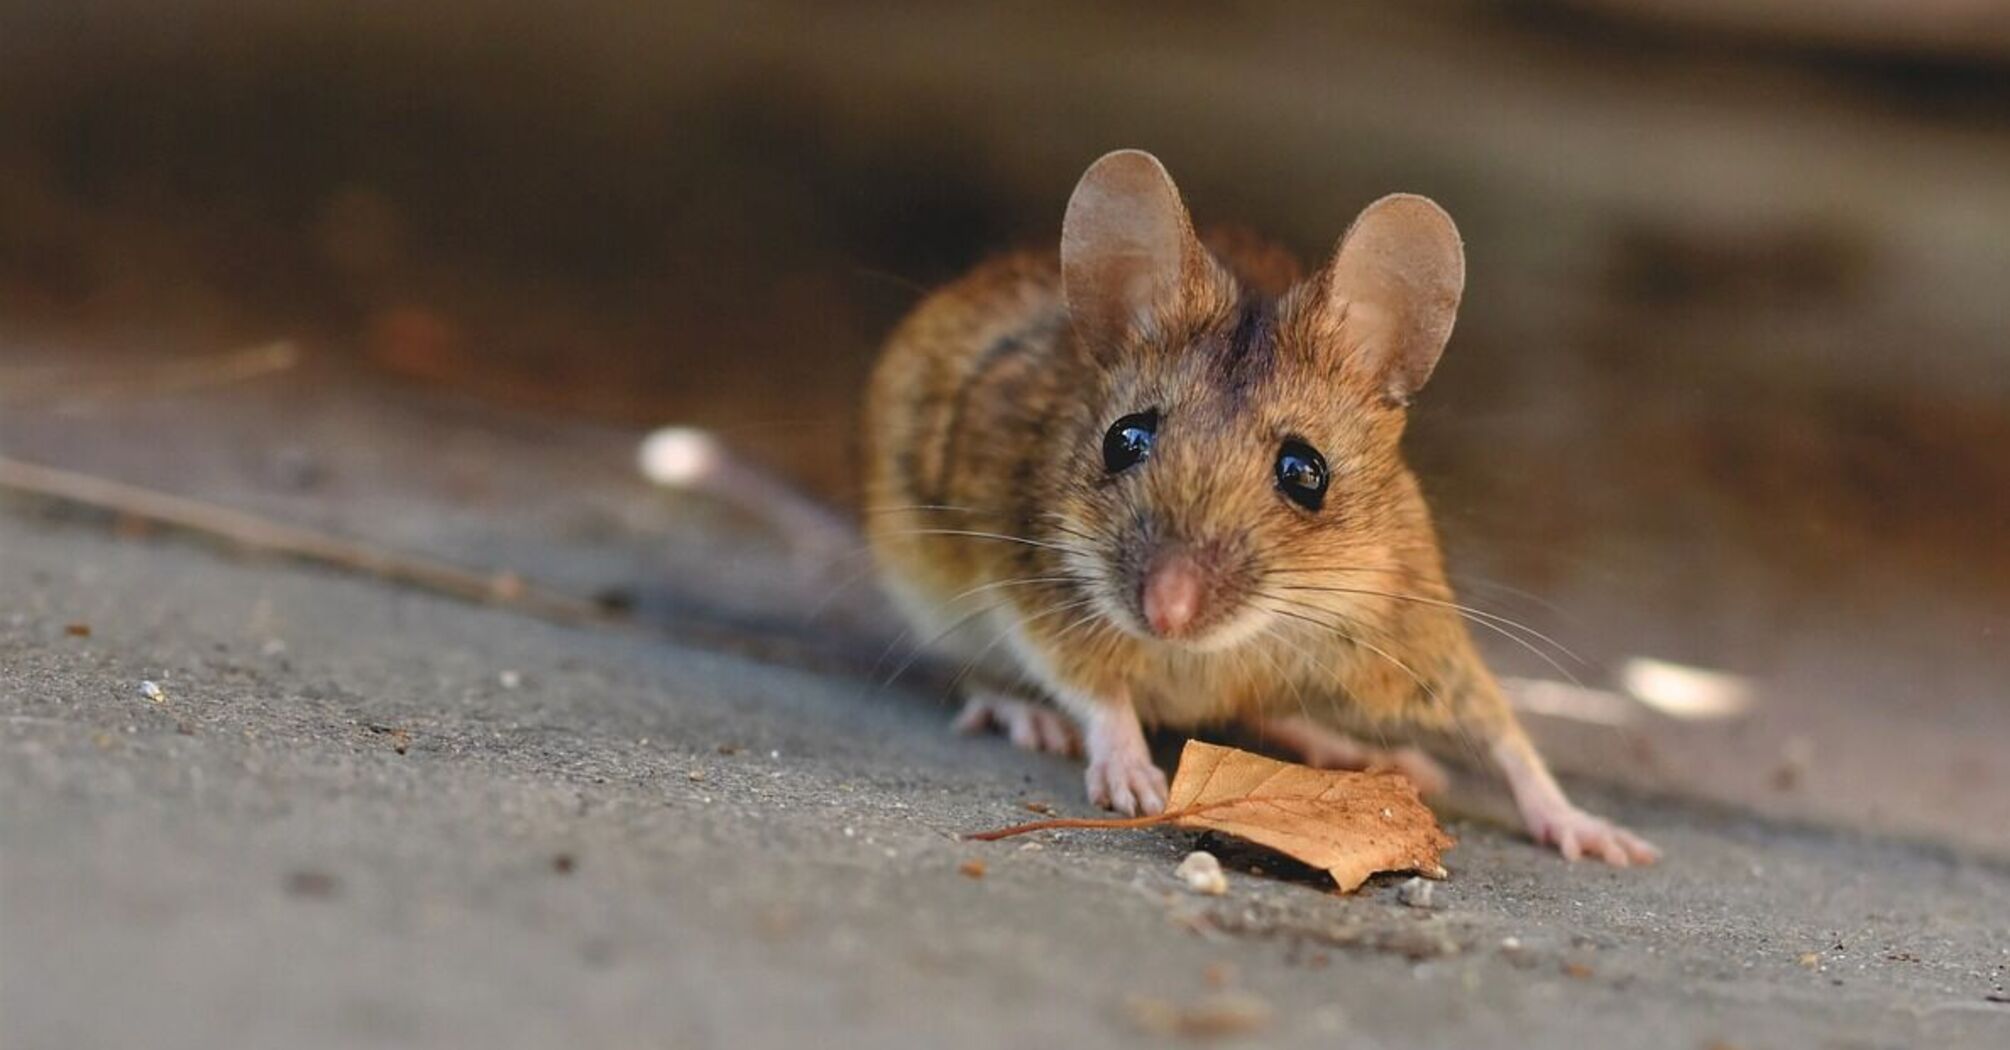 Banish mice for good: methods that will make rodents avoid your yard